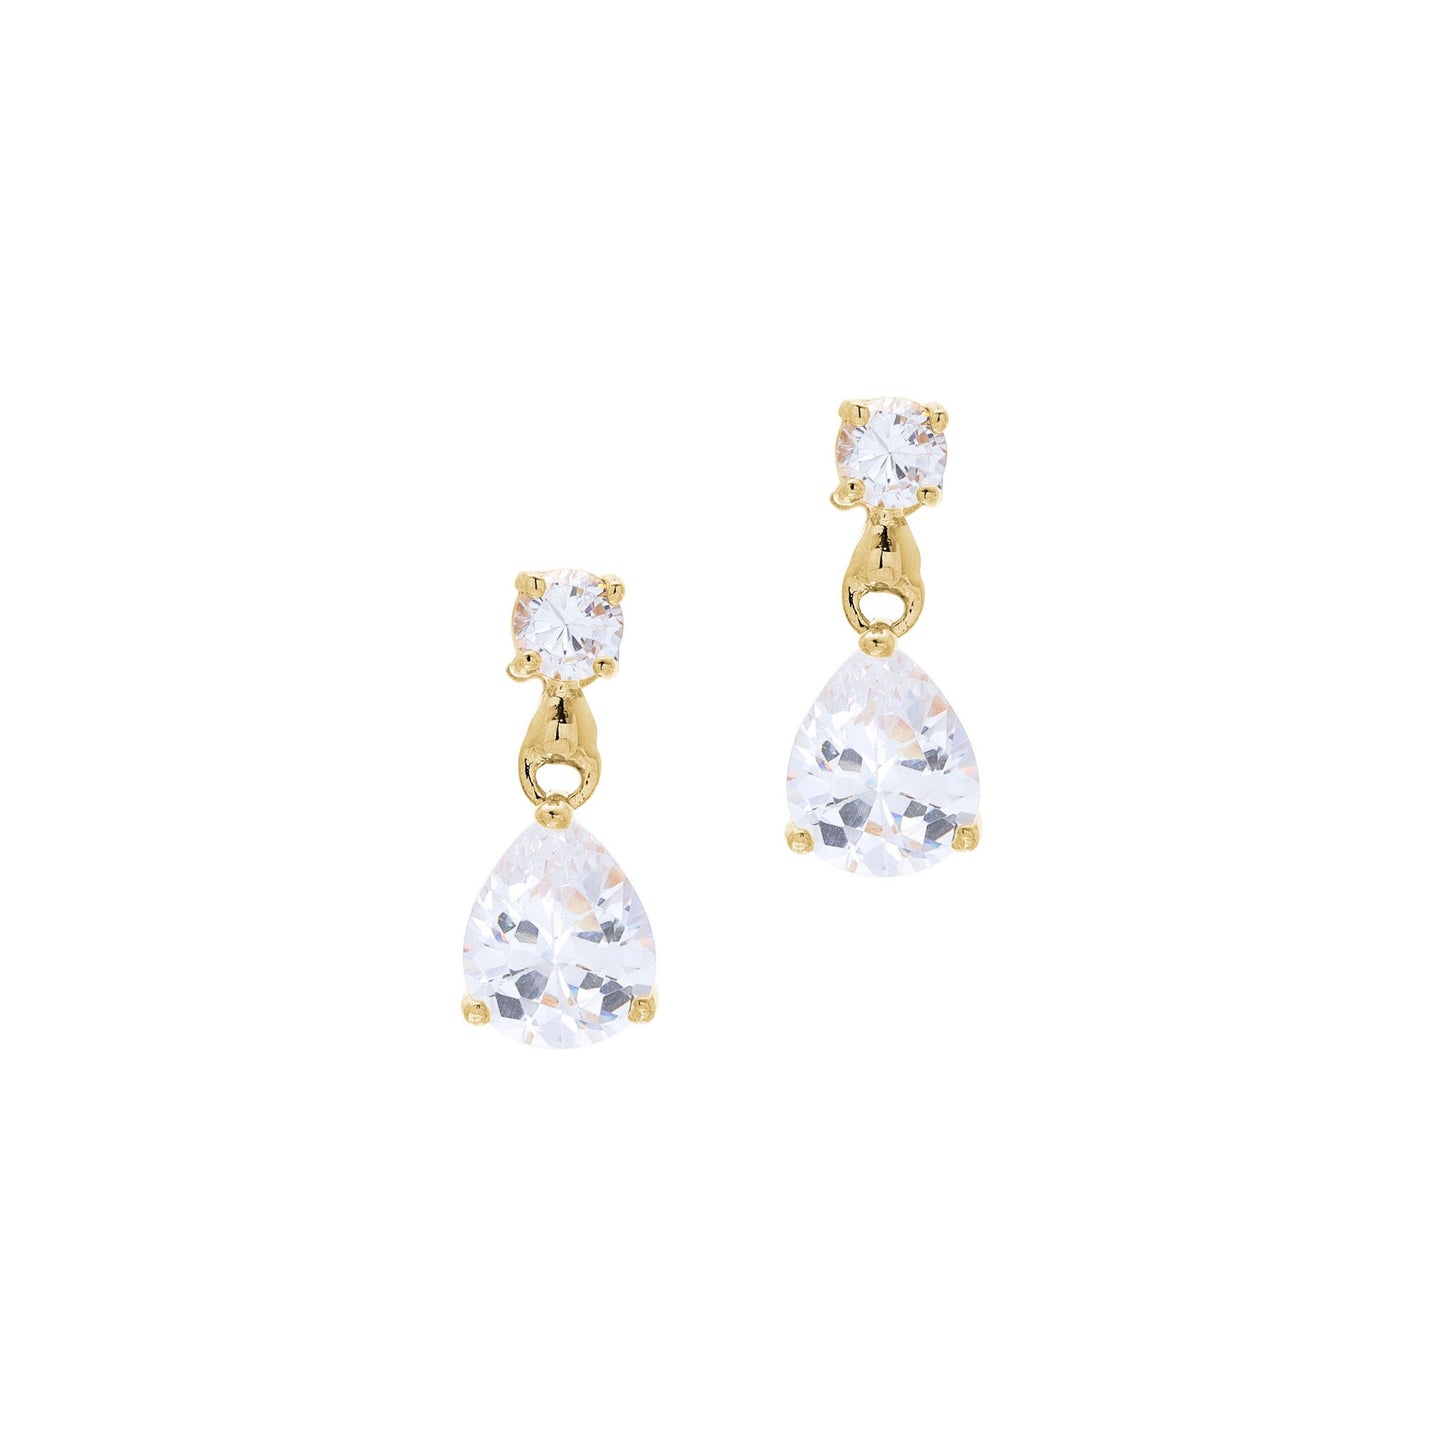 A teardrop and round simulated diamond earrings displayed on a neutral white background.